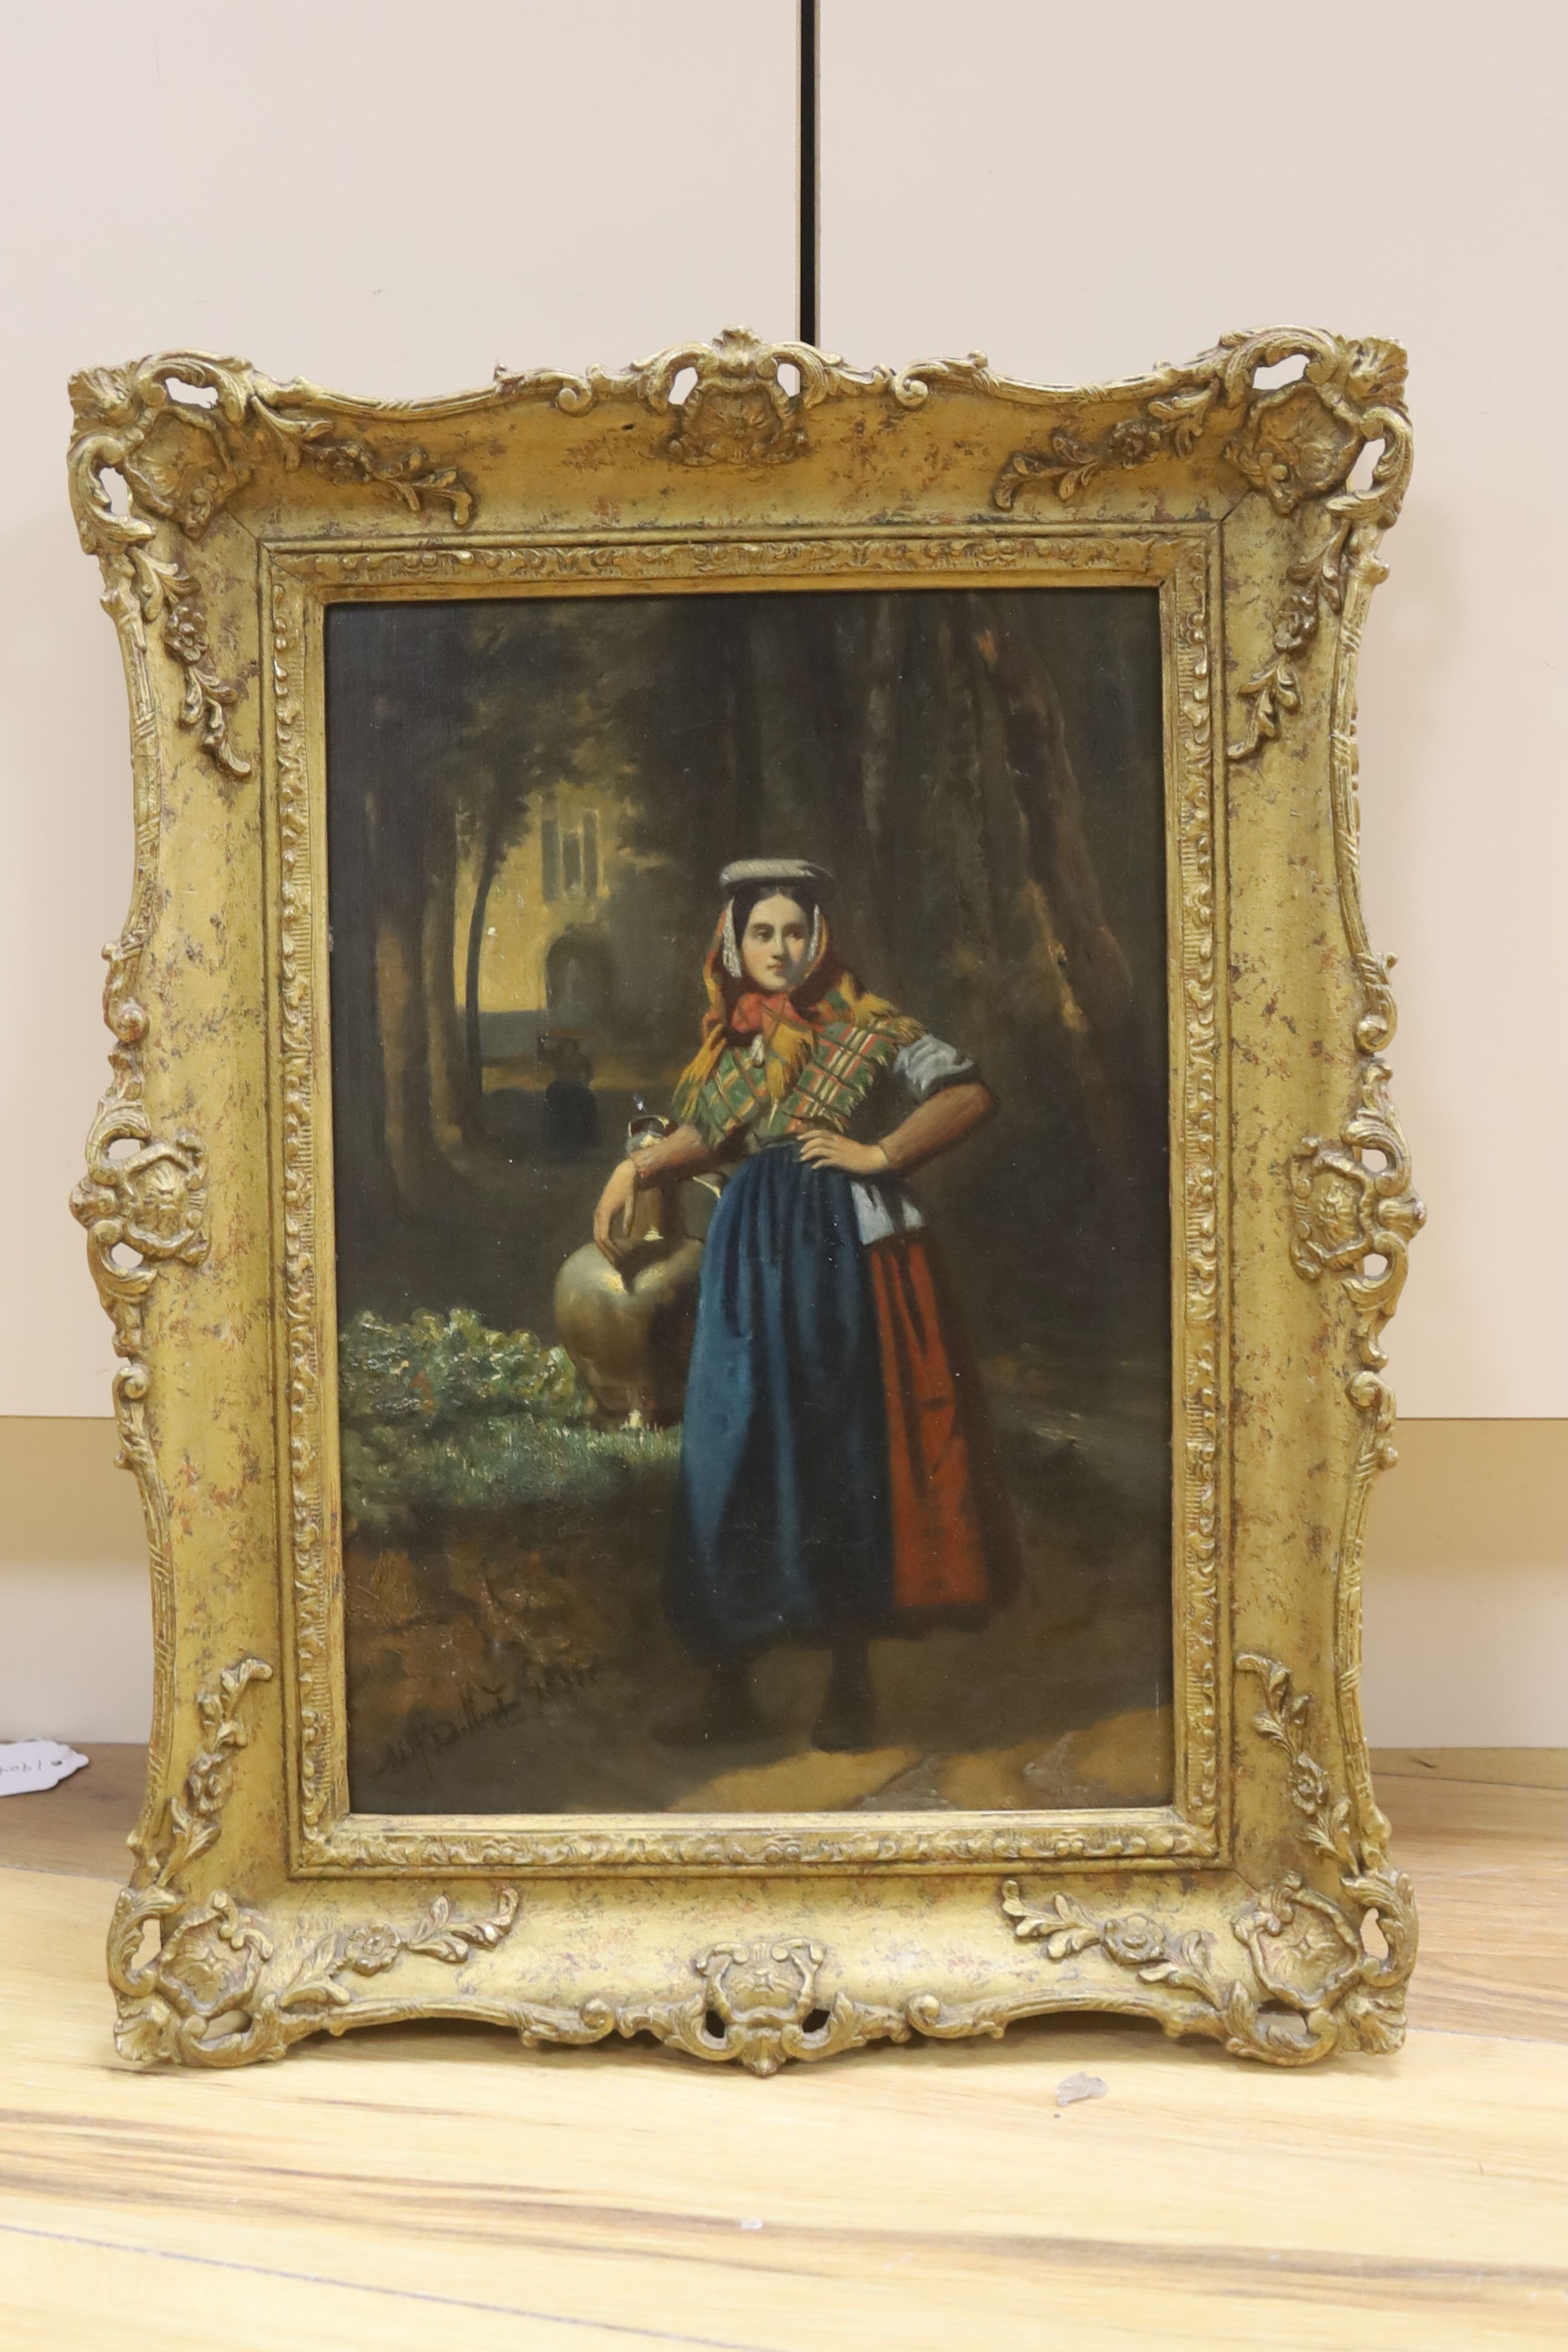 Attributed to Adolf Alexander Dillens (1821-1877), oil on panel, Water carrier in woodland, bears signature, 32 x 22cm